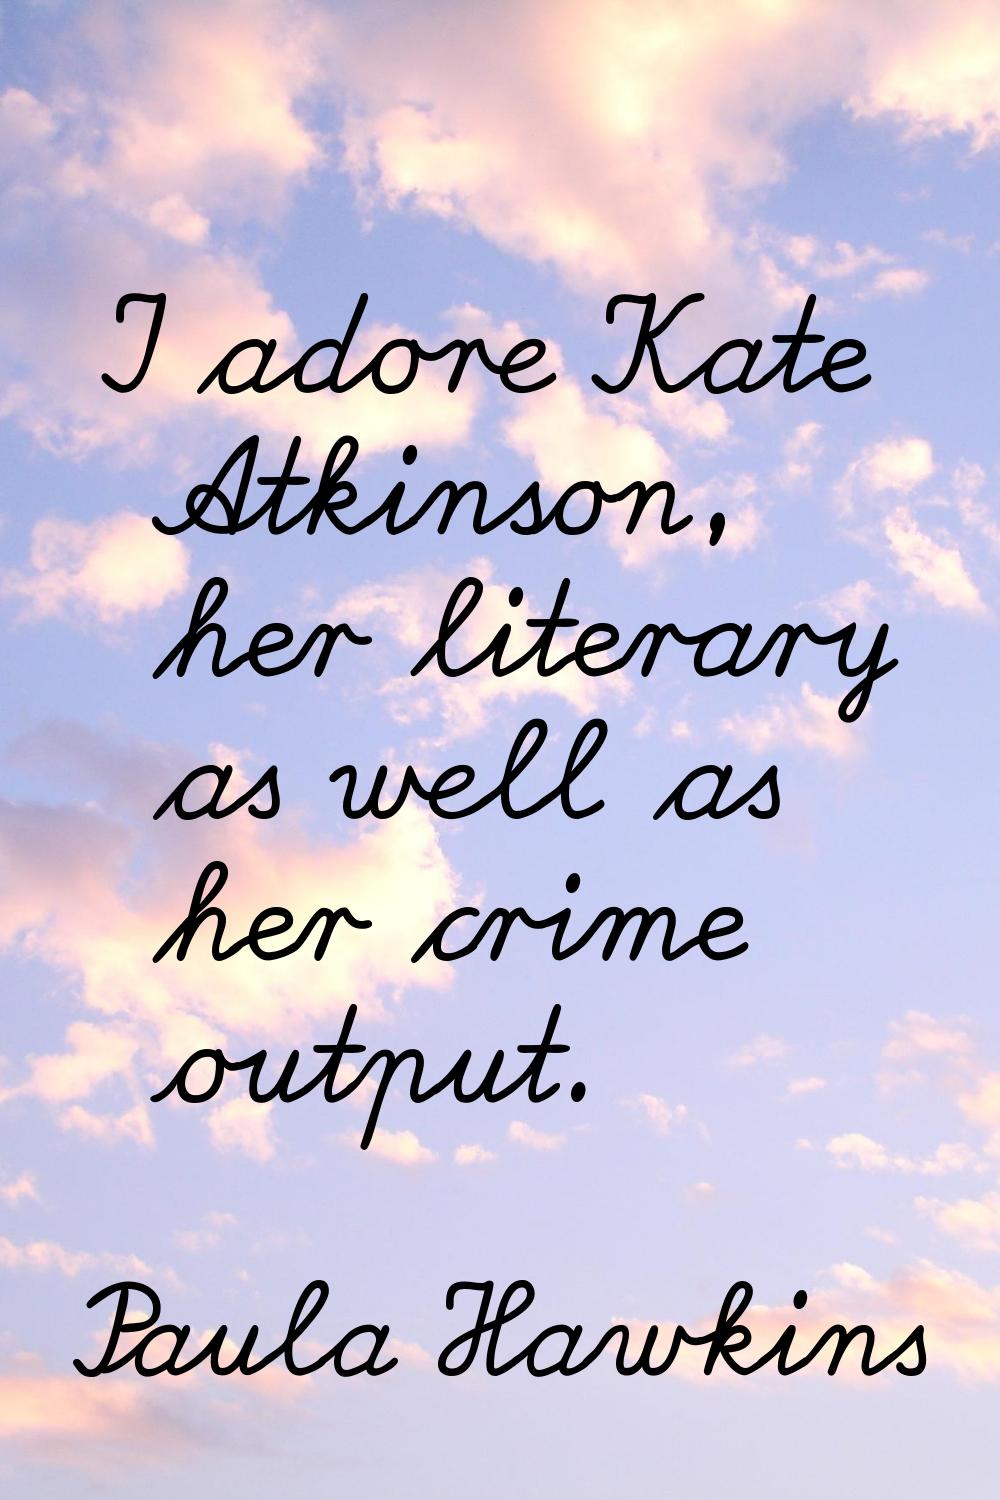 I adore Kate Atkinson, her literary as well as her crime output.